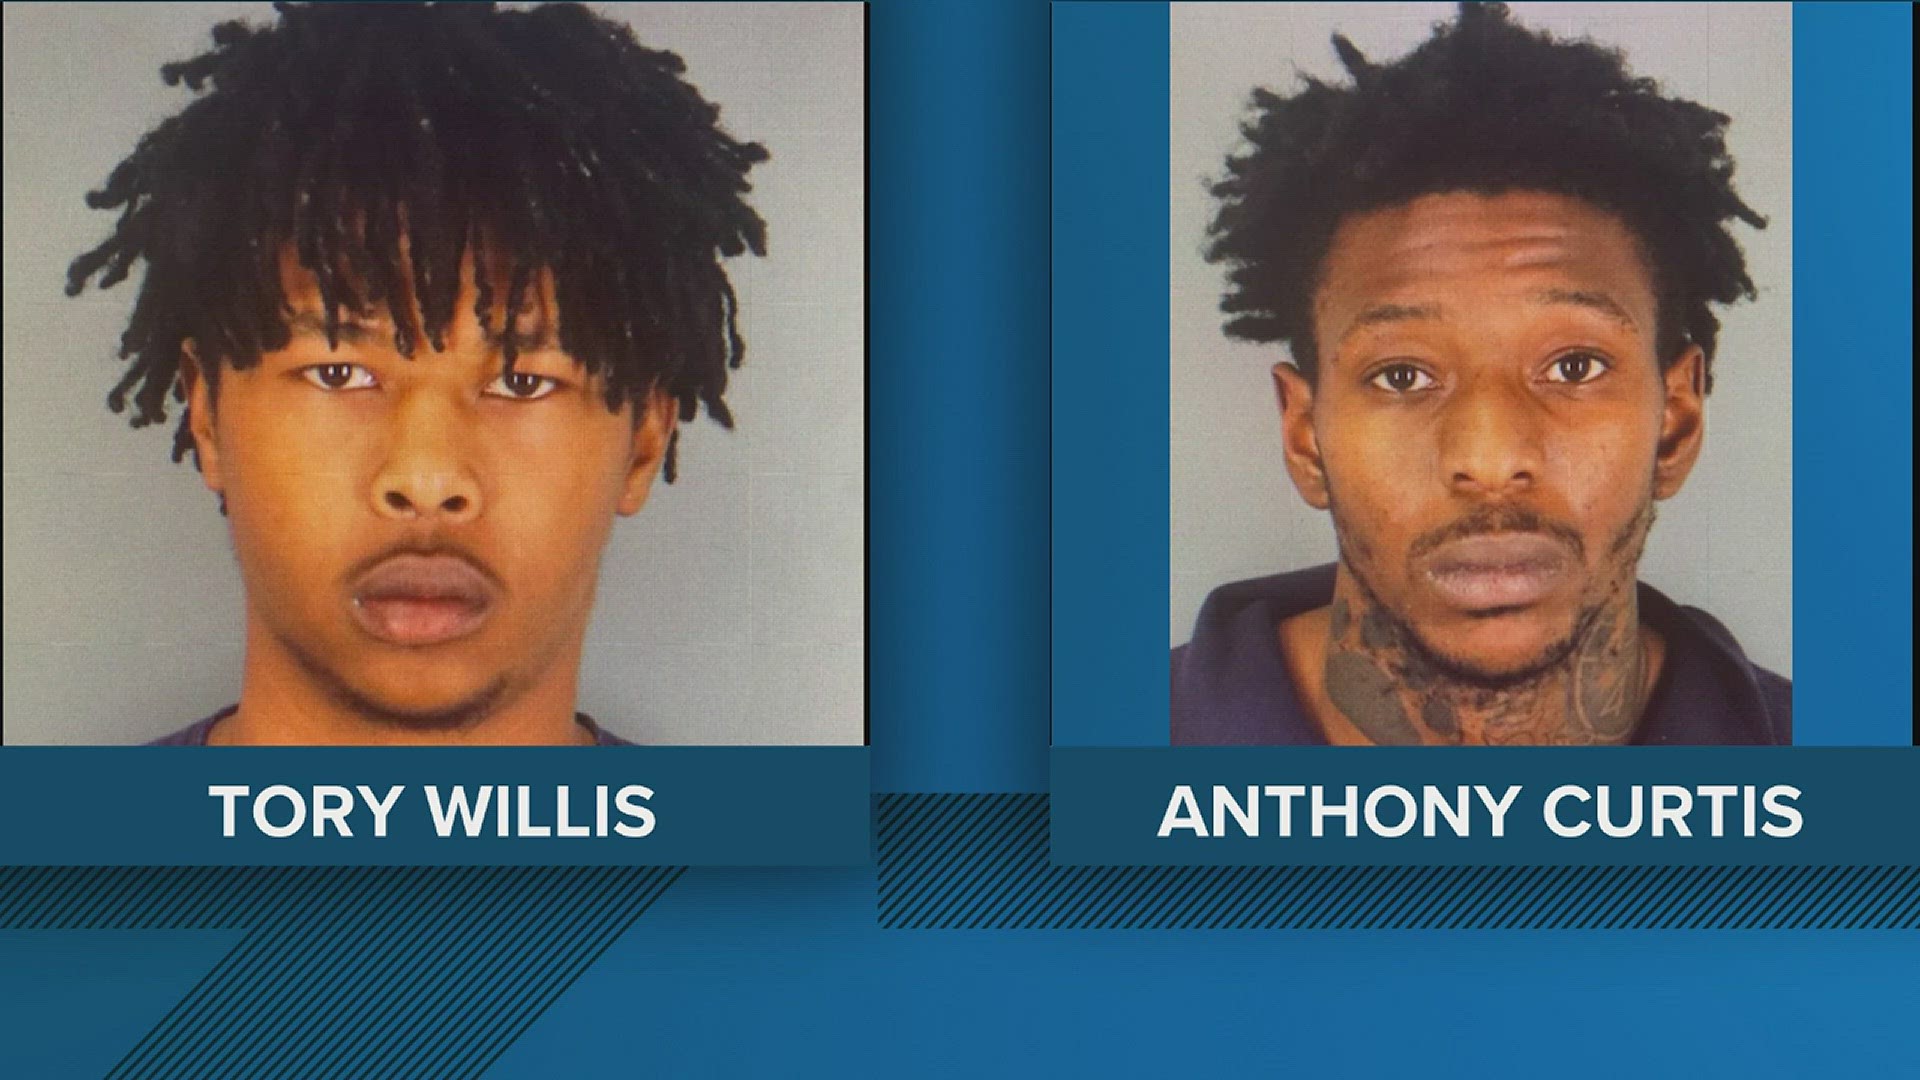 Tory Willis, 19, of Duson, Louisiana and Anthony Curtis, 20, of Corona, California led Beaumont Police on a chase in a car reported stolen out of Louisiana.